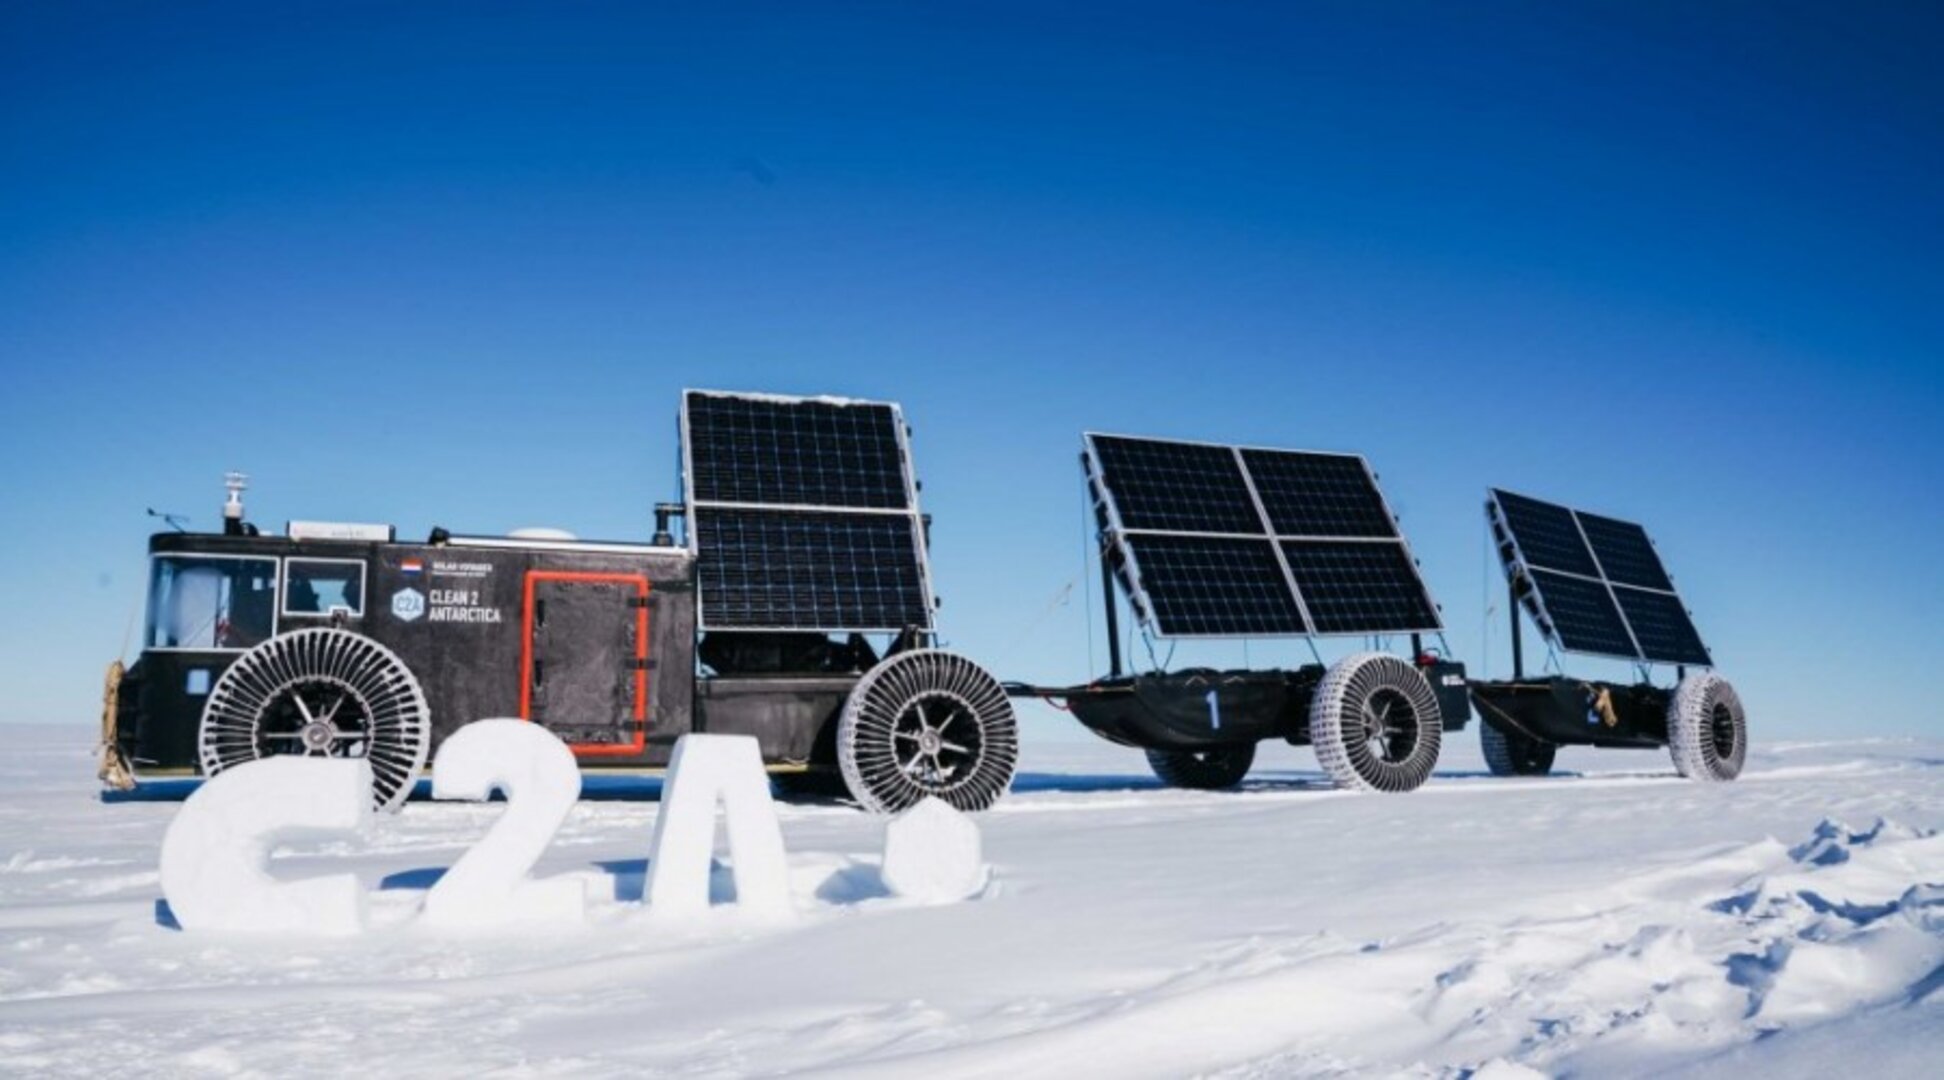 Recycled solar powered car in Antarctica